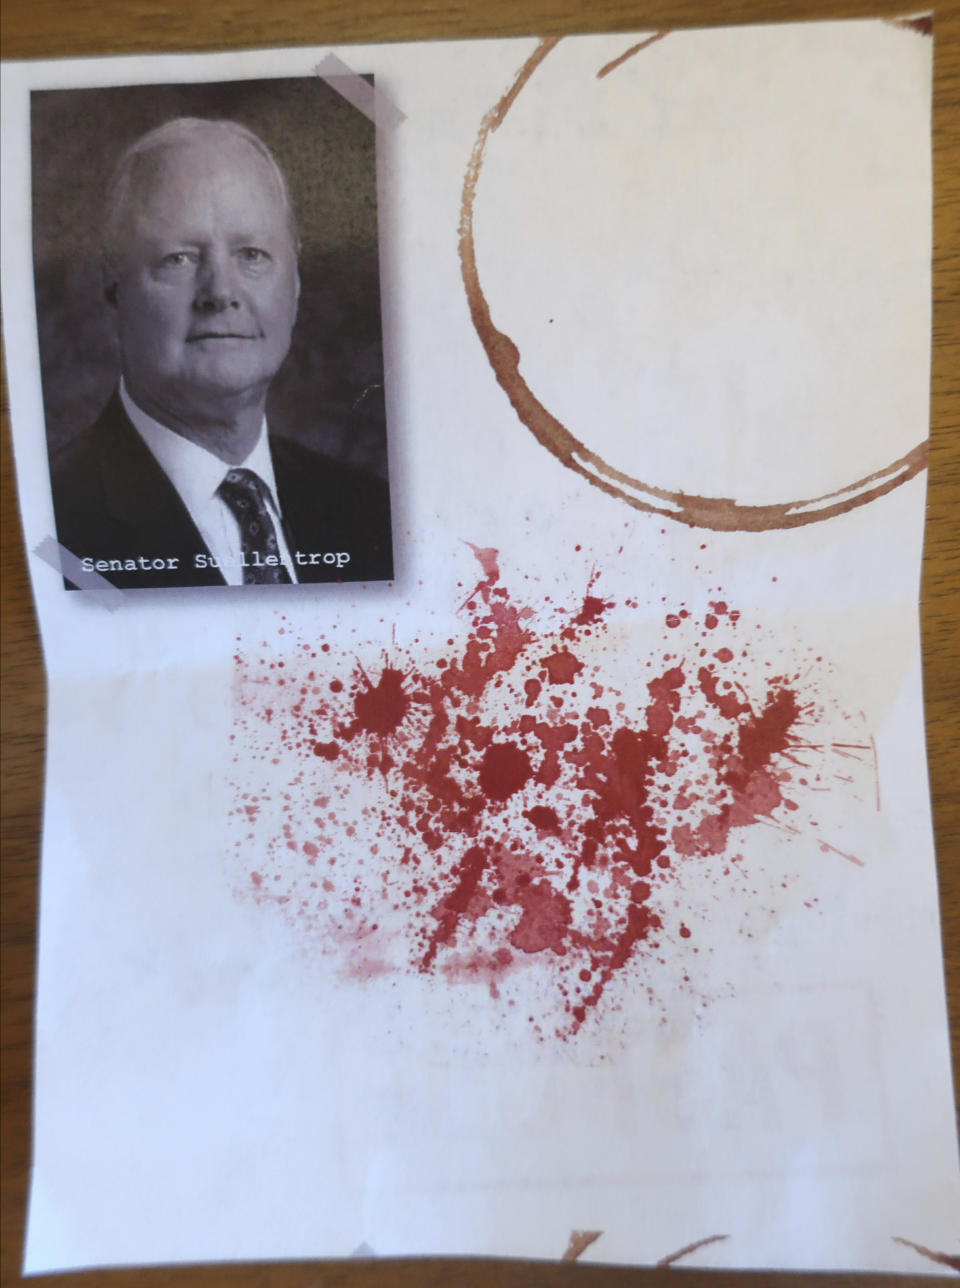 Pictured is one of several thousand leaflets dropped in the Statehouse rotunda in Topeka, Kansas, to protest in favor of Medicaid expansion Friday, May 3, 2019. This leaflets contains a picture of Senate health committee Chairman Gene Suellentrop, R-Wichita, who opposes expansion, and a spattering of blood. (AP Photo/John Hanna)